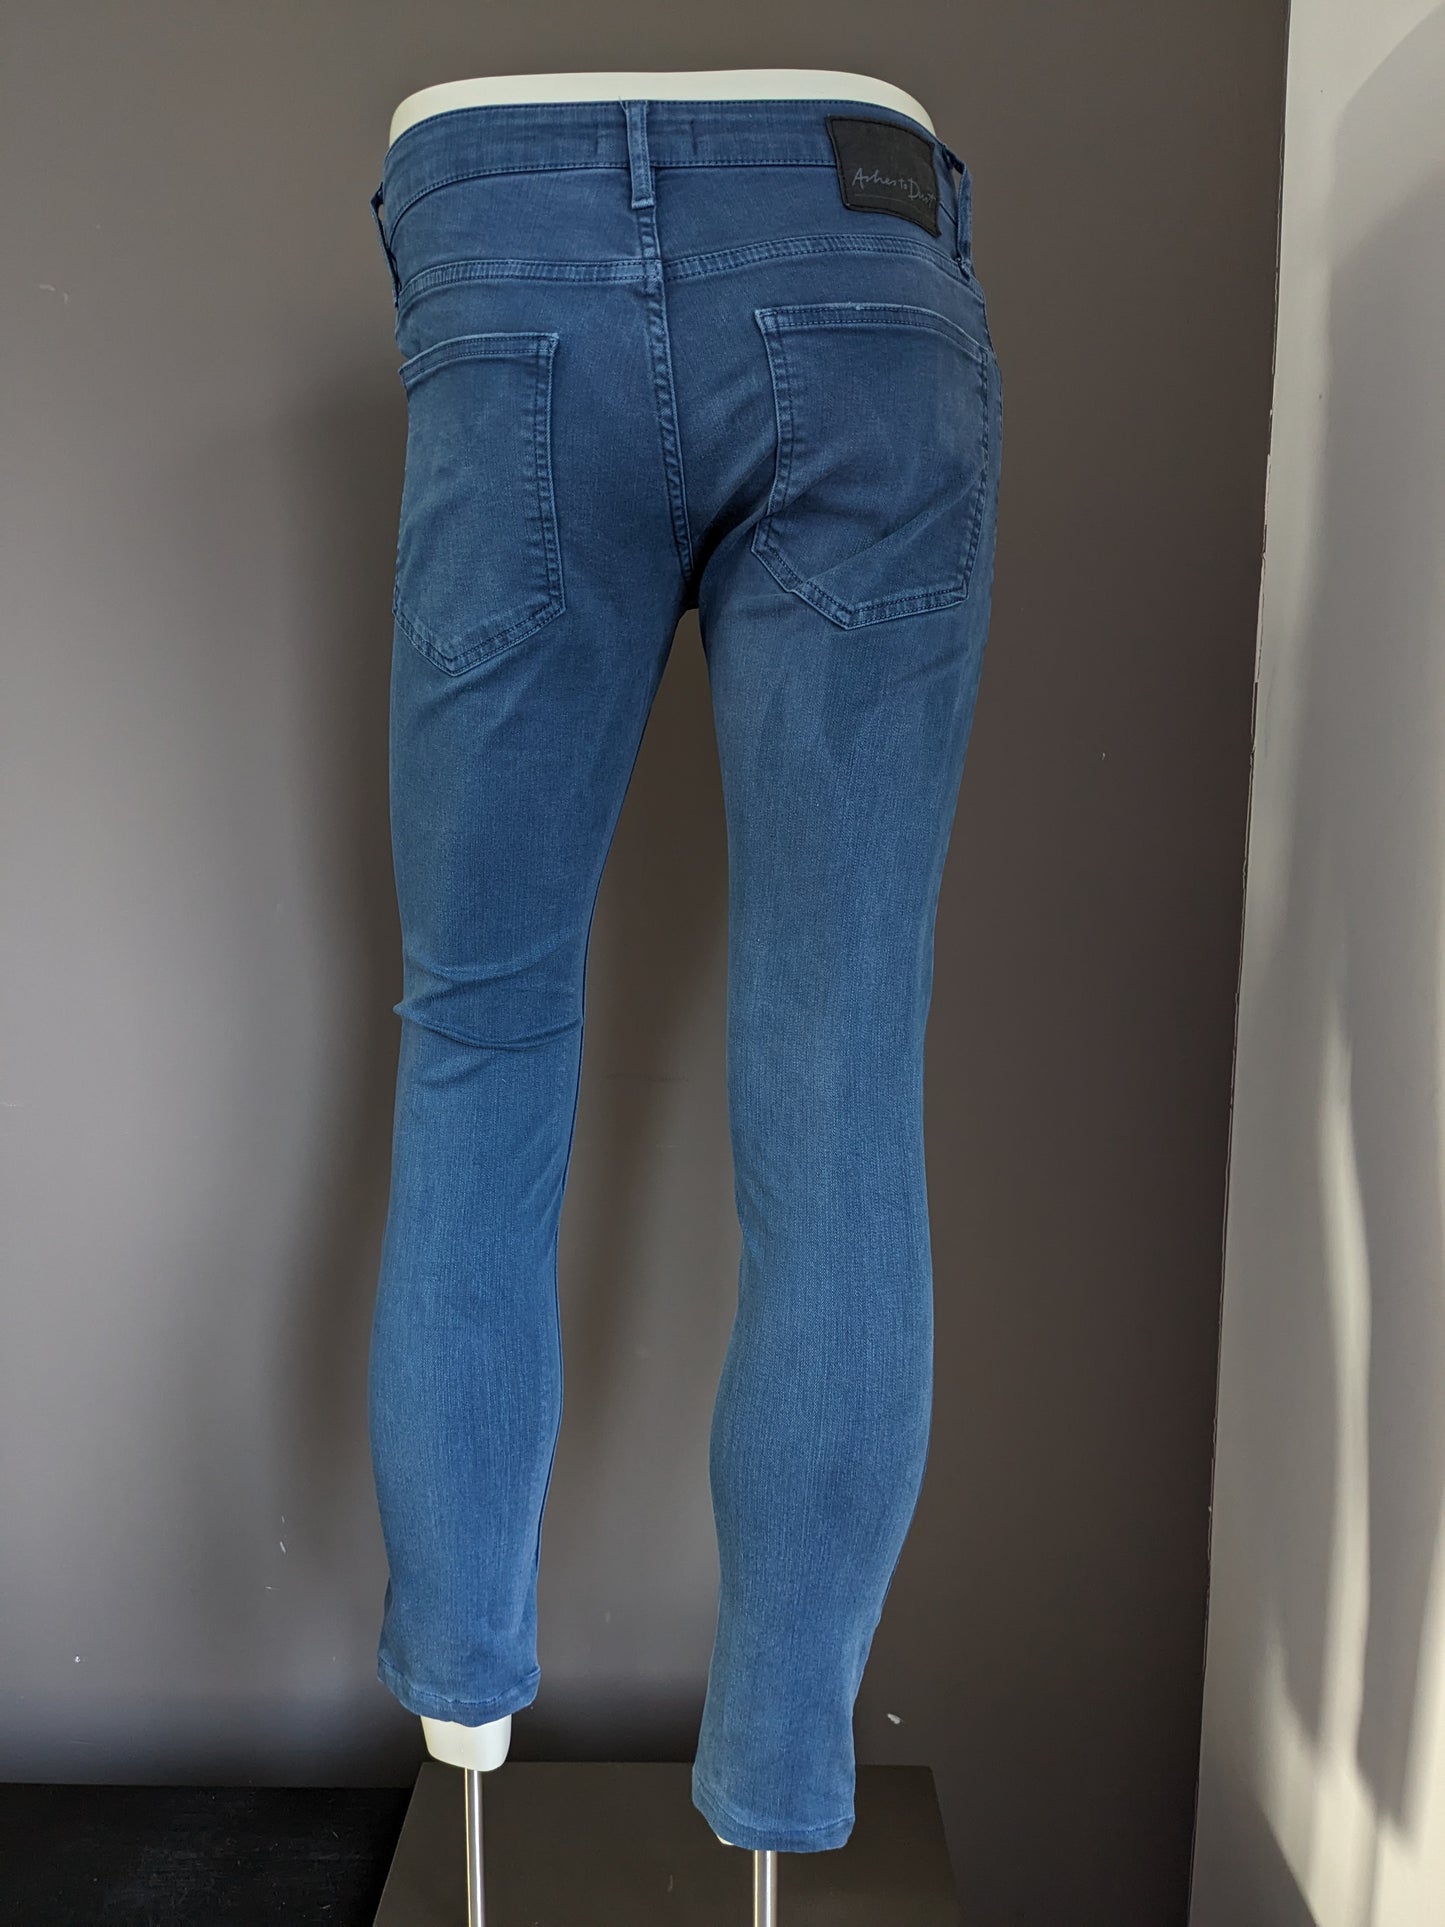 Ashes to Dust Jeans. Blue. Size W30 - L26 Stretch.